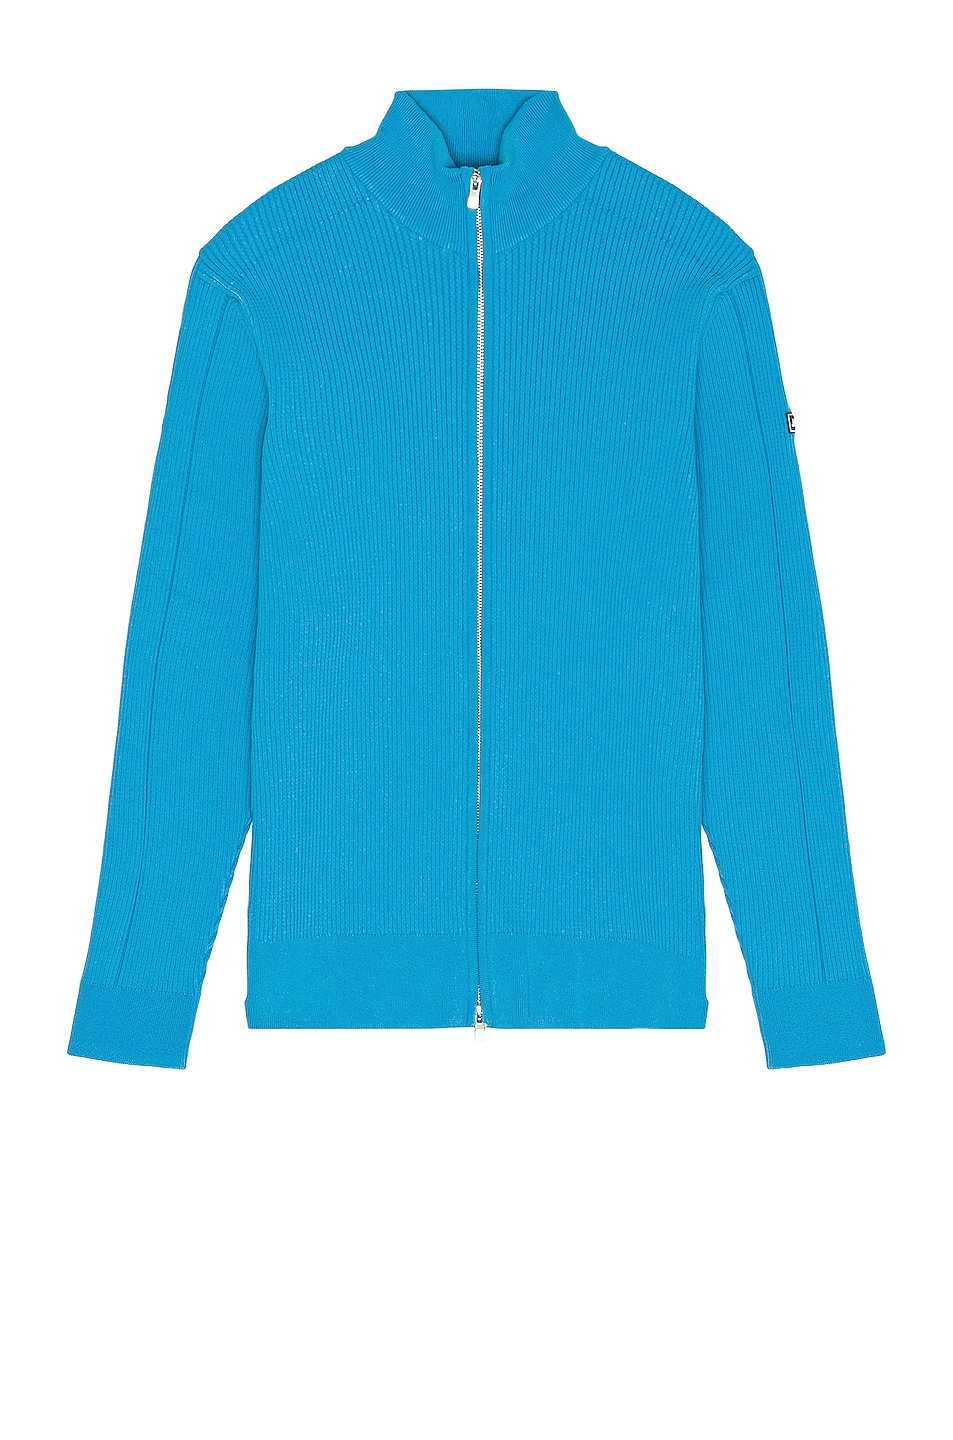 Image 1 of JACQUEMUS Frescu Top in Turquoise